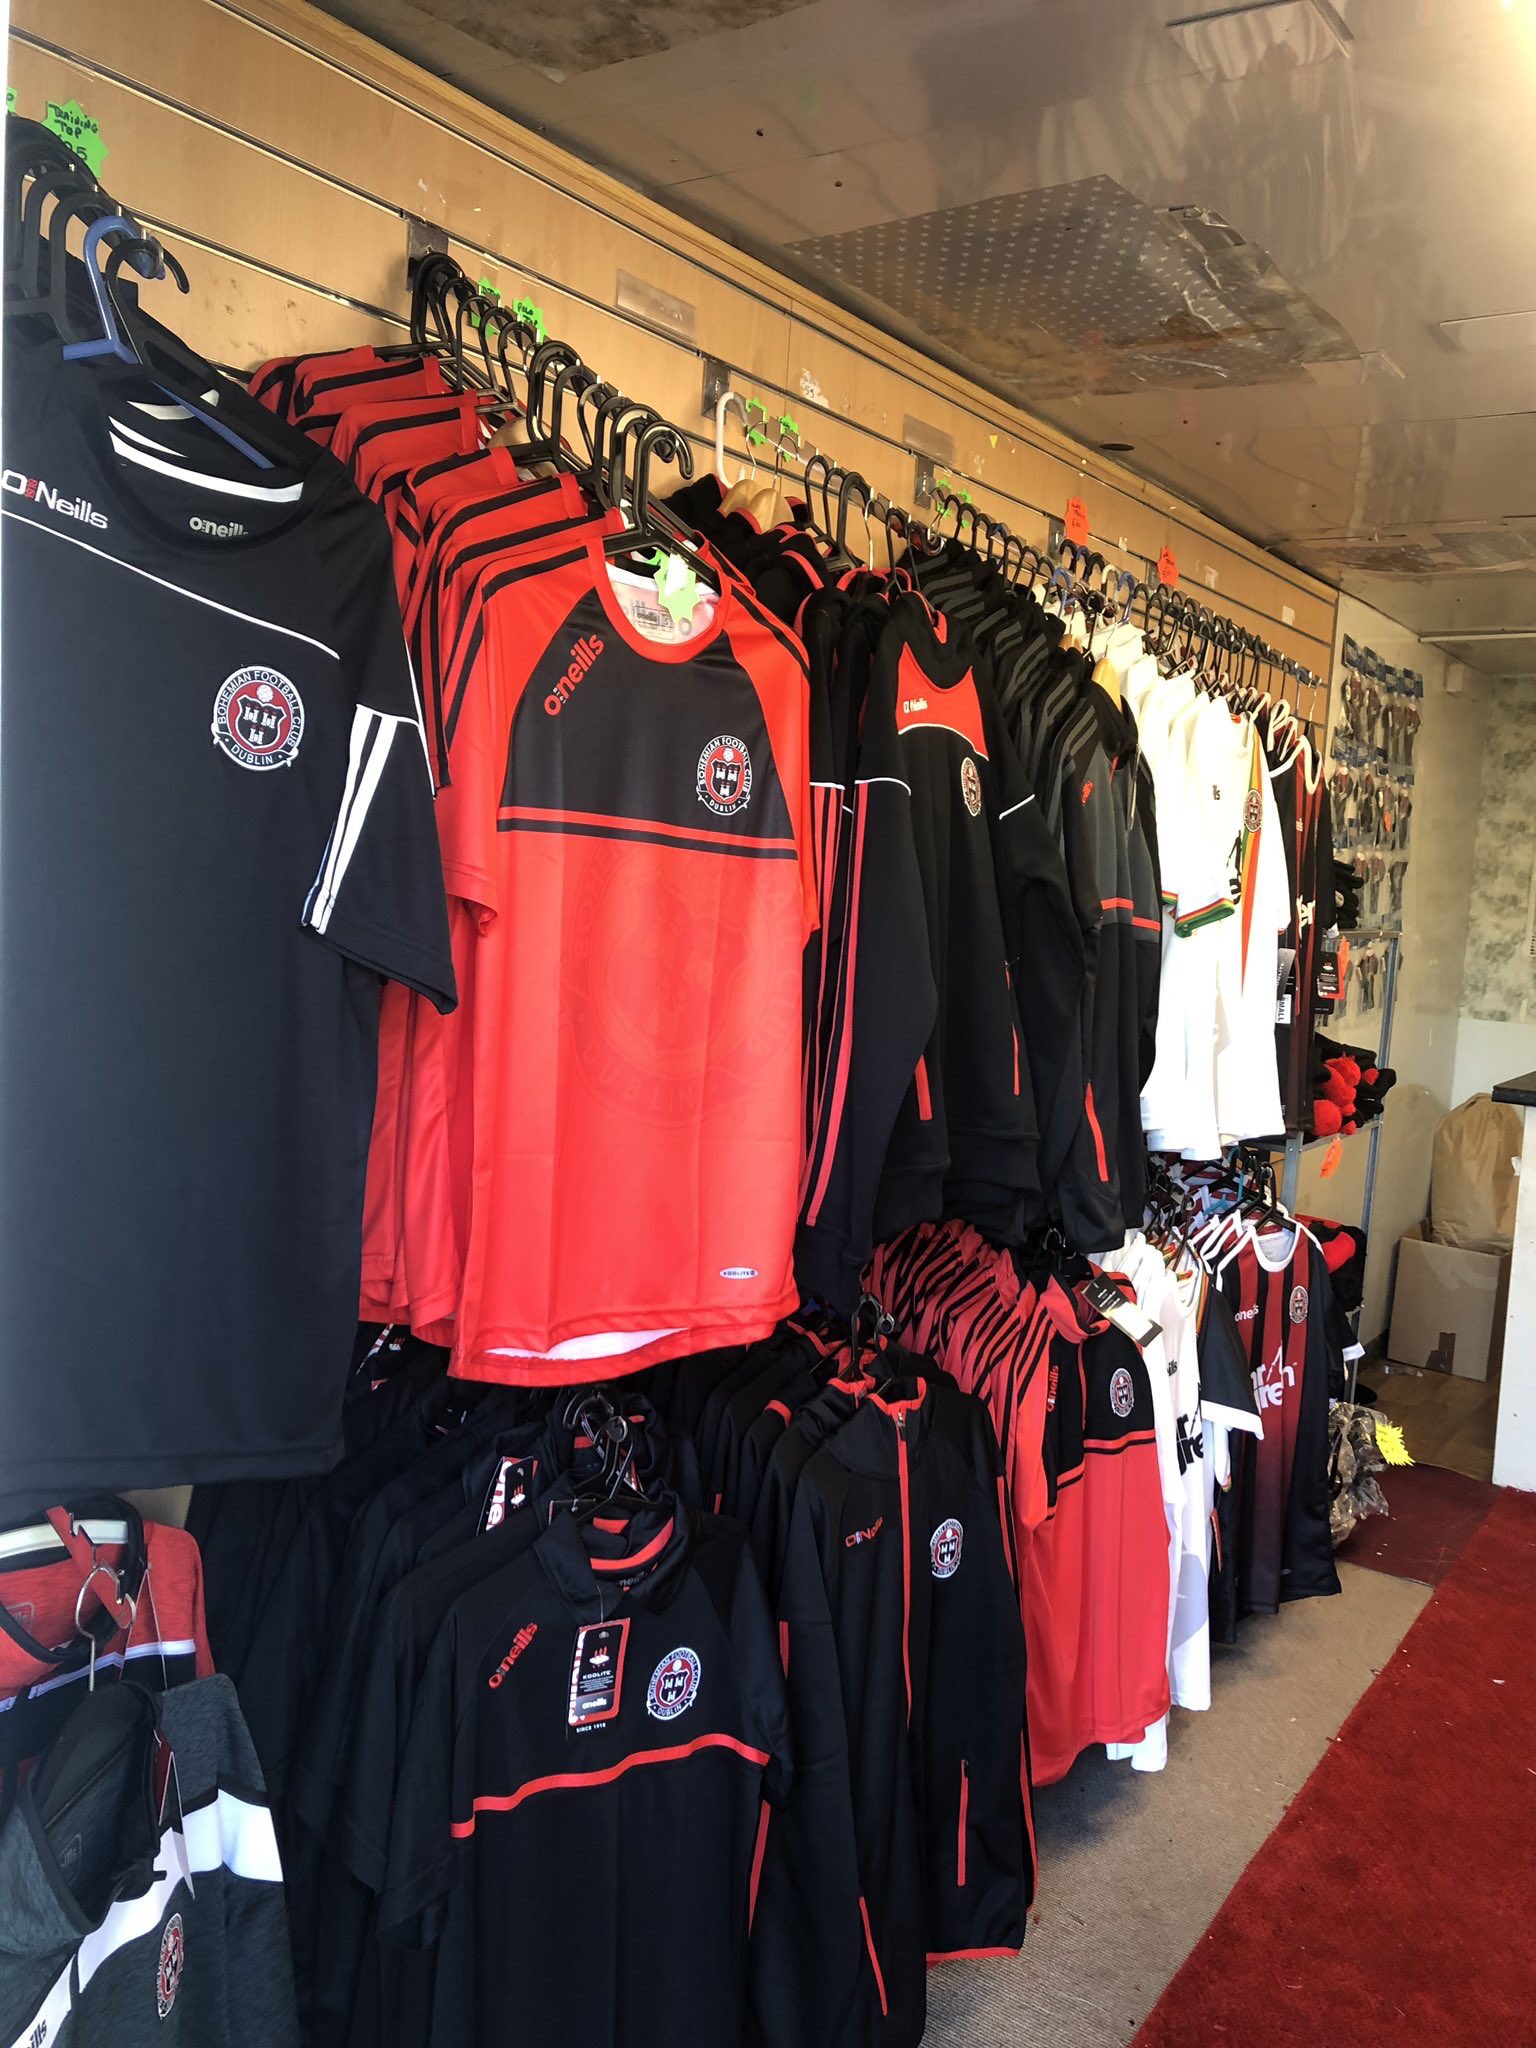 Bohemian Football Club On Twitter The Bohs Store Has More Variety Of Merchandise Than Ever All The New O Neill S Gear Now In Stock A Big Thanks To Club Volunteers Deirdre And Laura